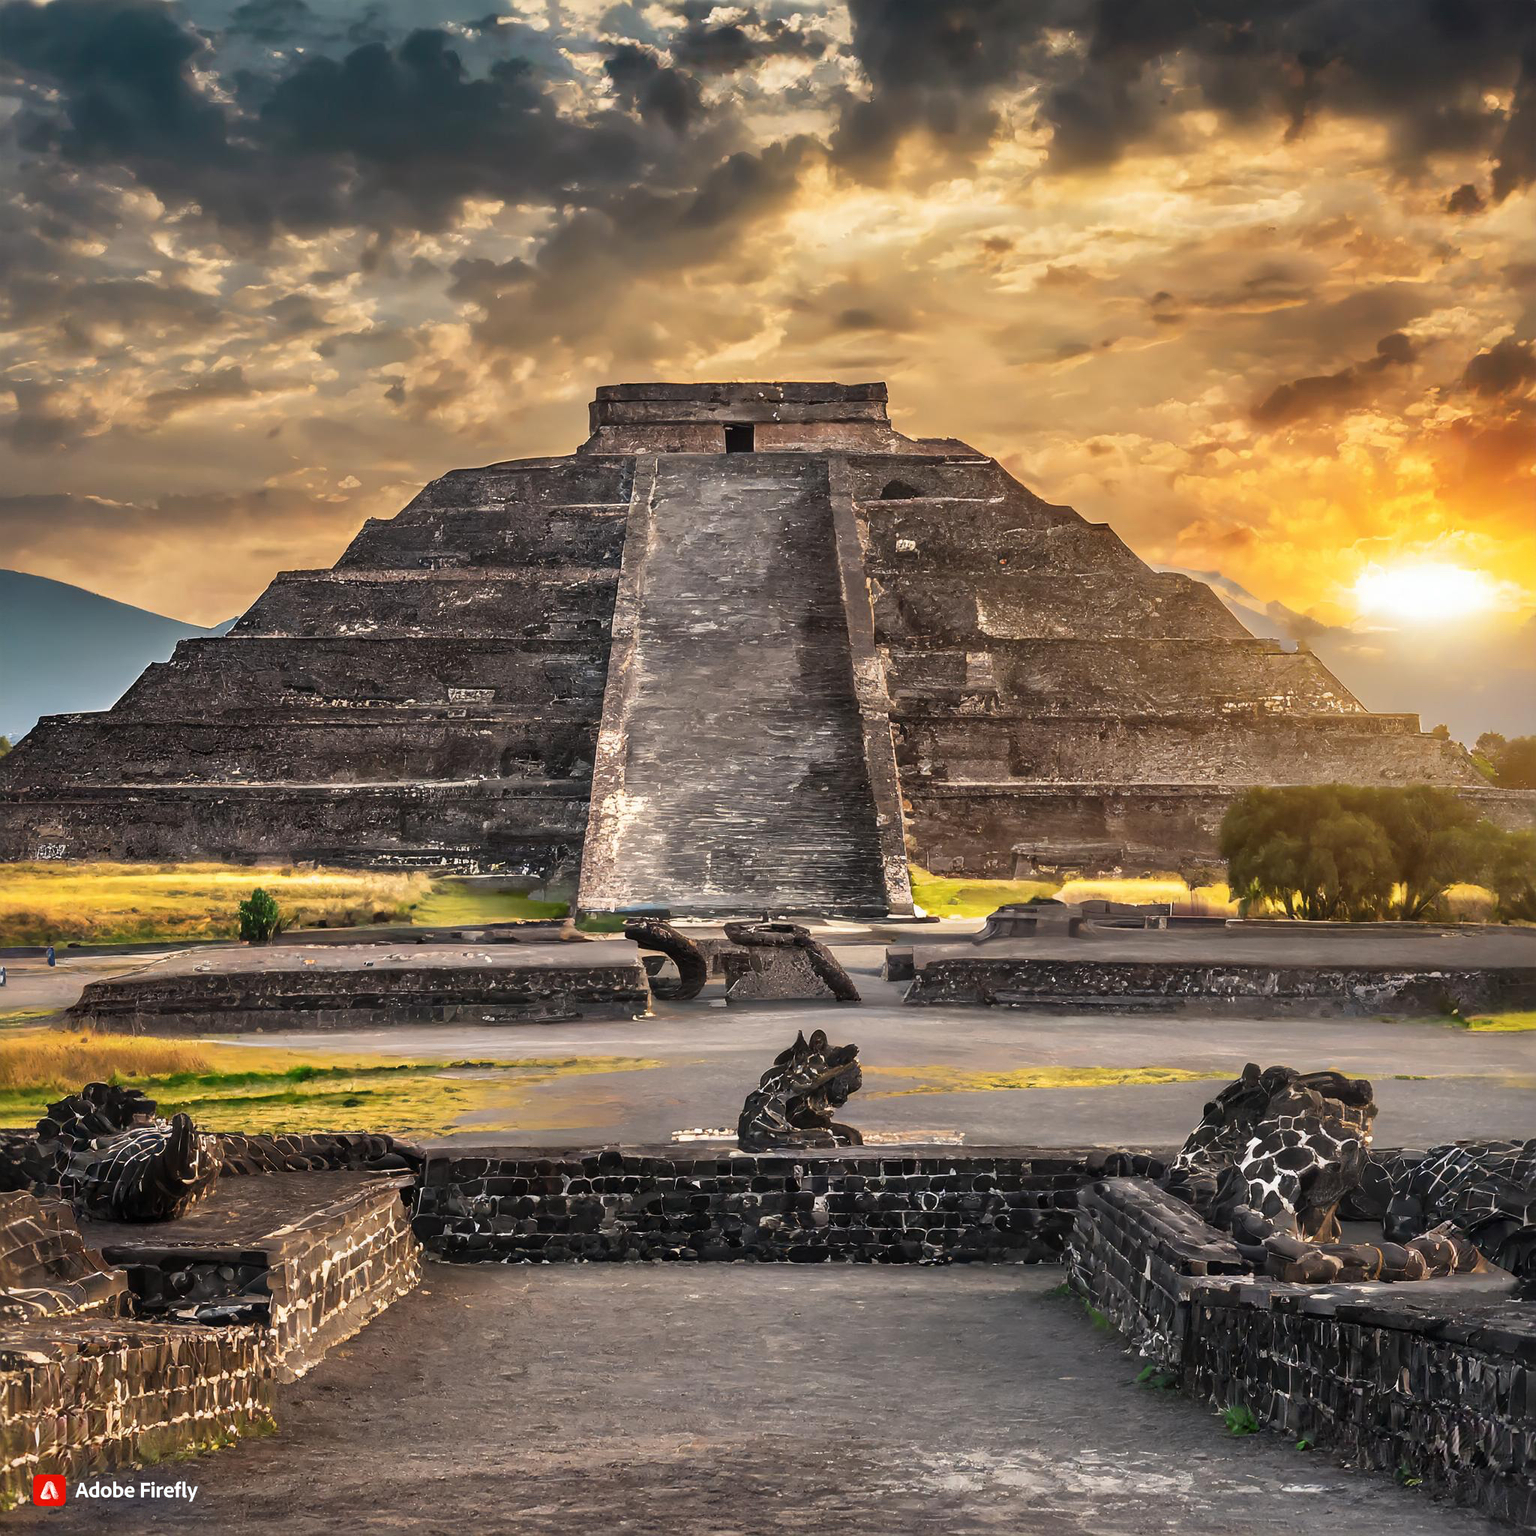 Firefly front facing Teotihuacán in its prime with snakes and a beautiful sunset 30127